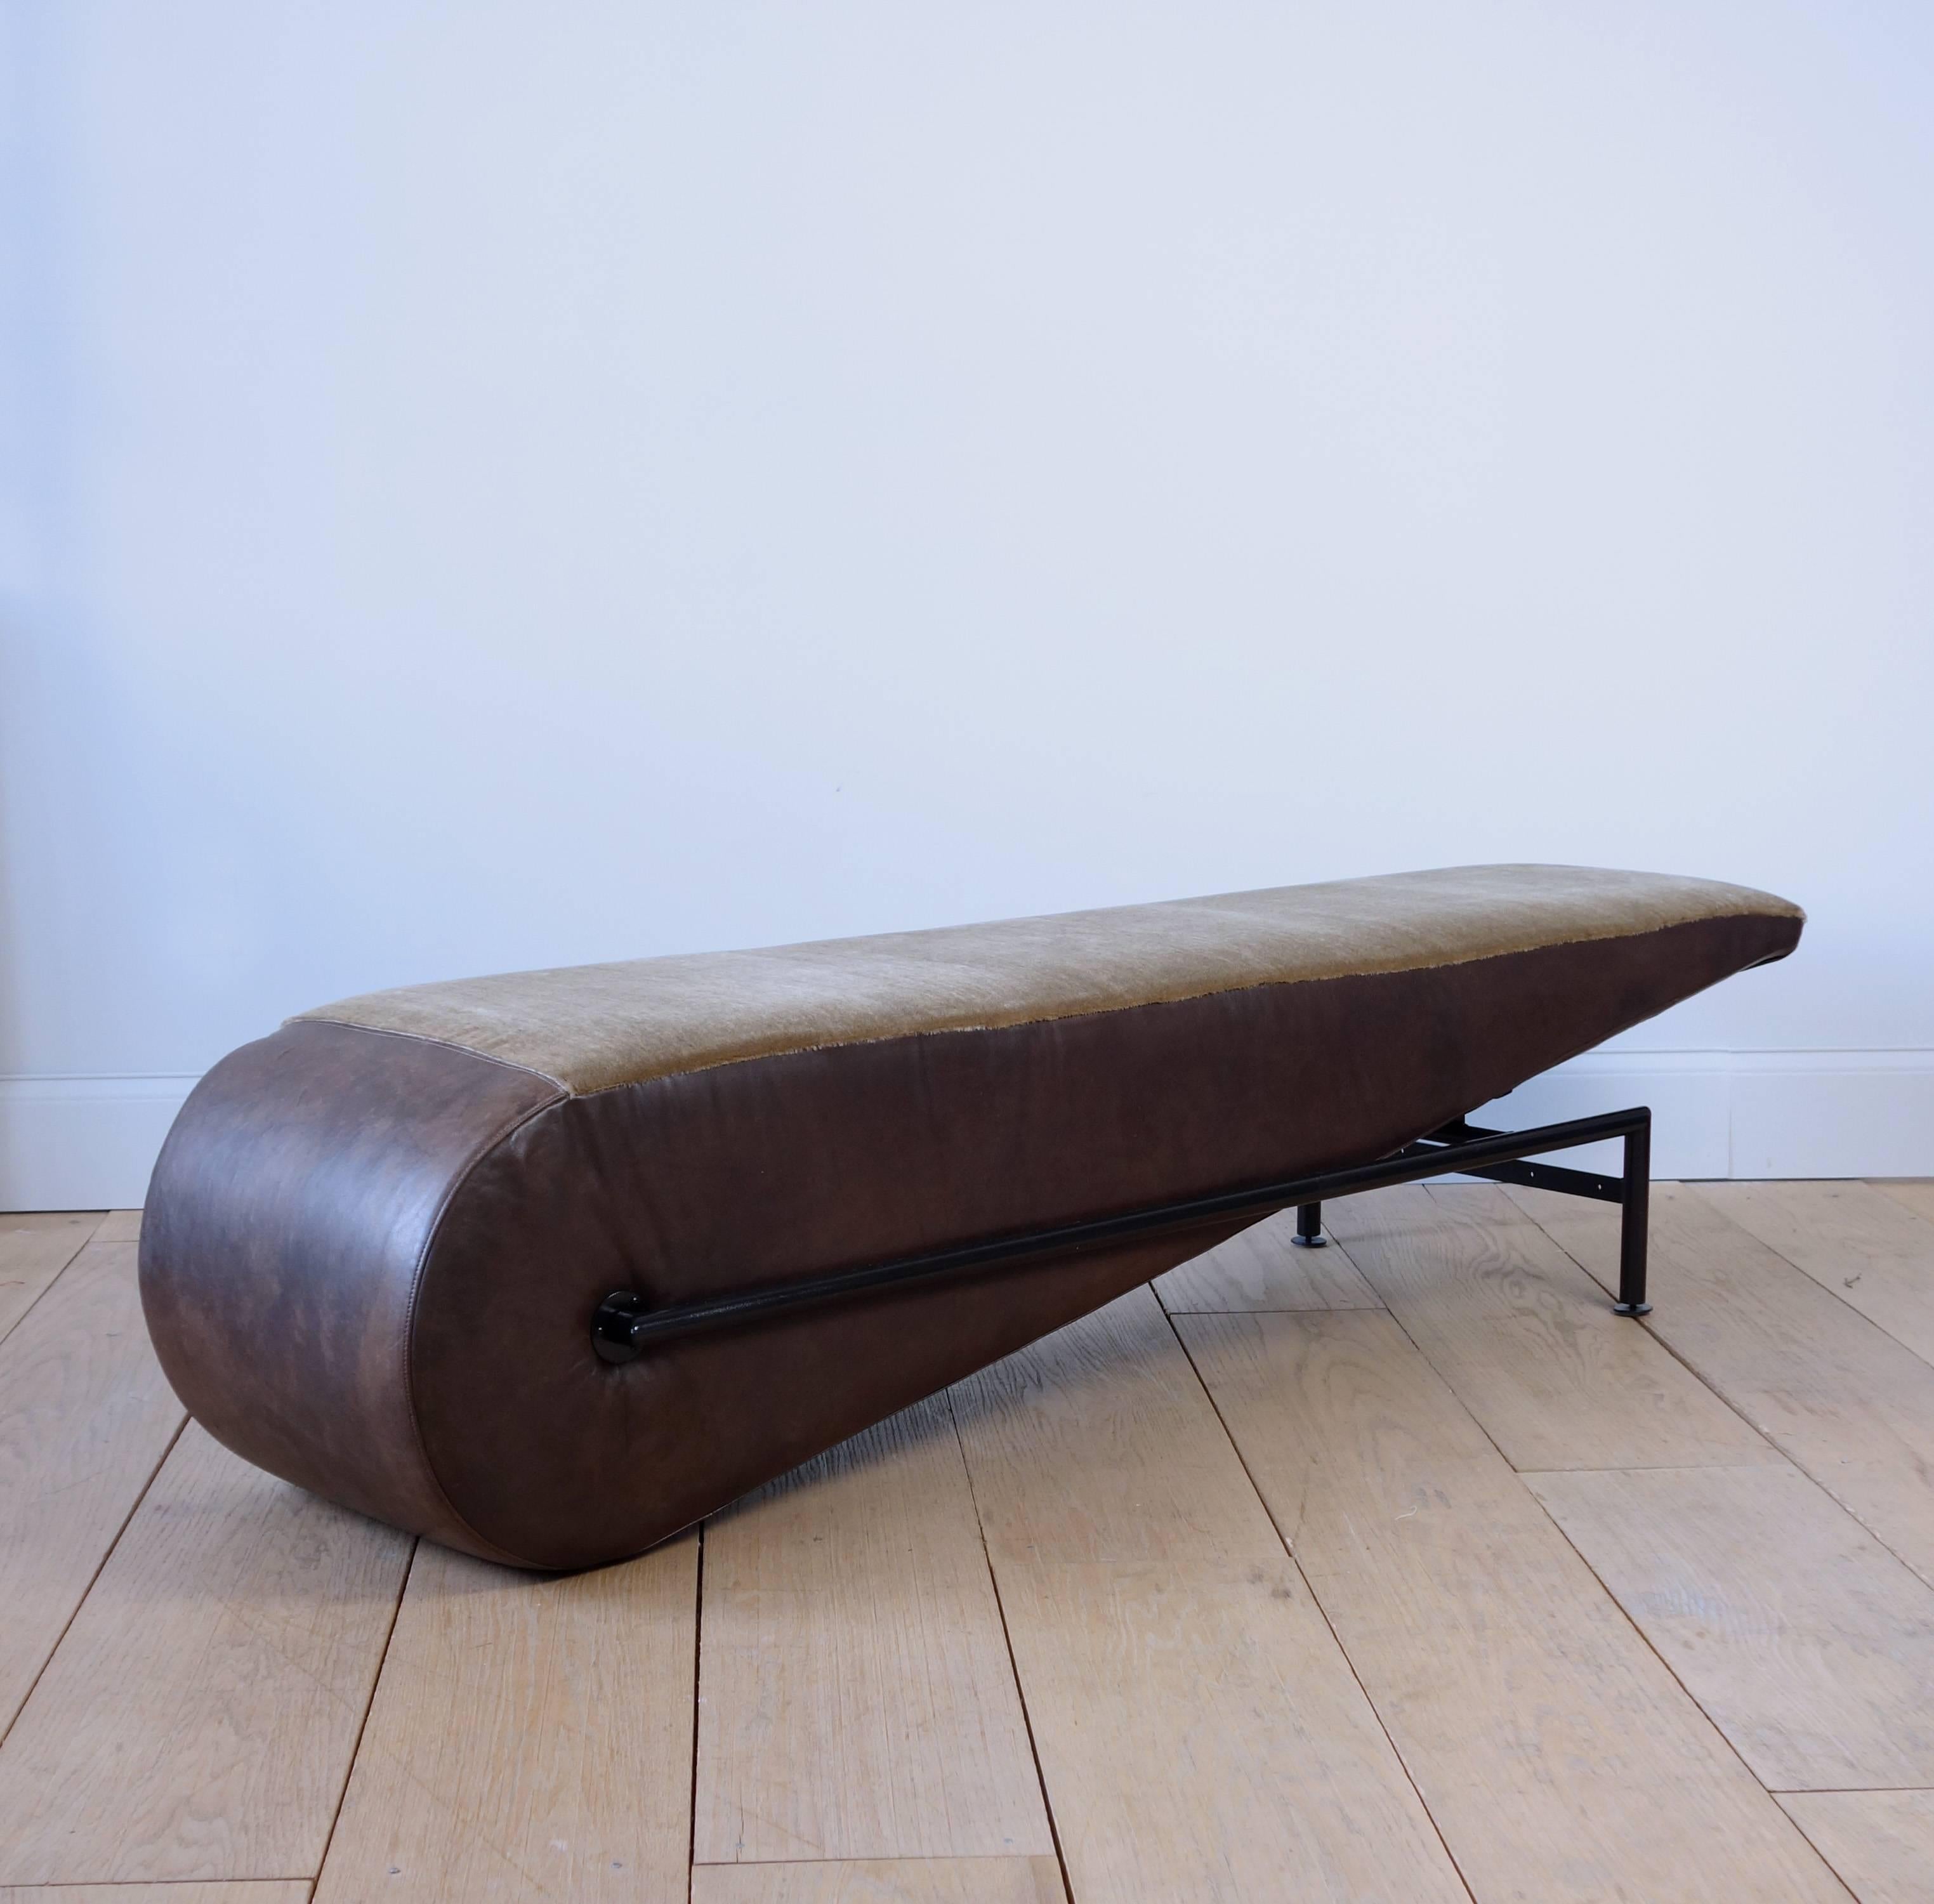 A cantilevered daybed designed by the Swedish Jonas Bohlin for Källemo in 1987 and exhibited at Salon Art & Design in the same year, in the Grand Palais, Paris. Bohlin won the Georg Jensen prize in 1988. Only 10-15 of the daybed were produced,